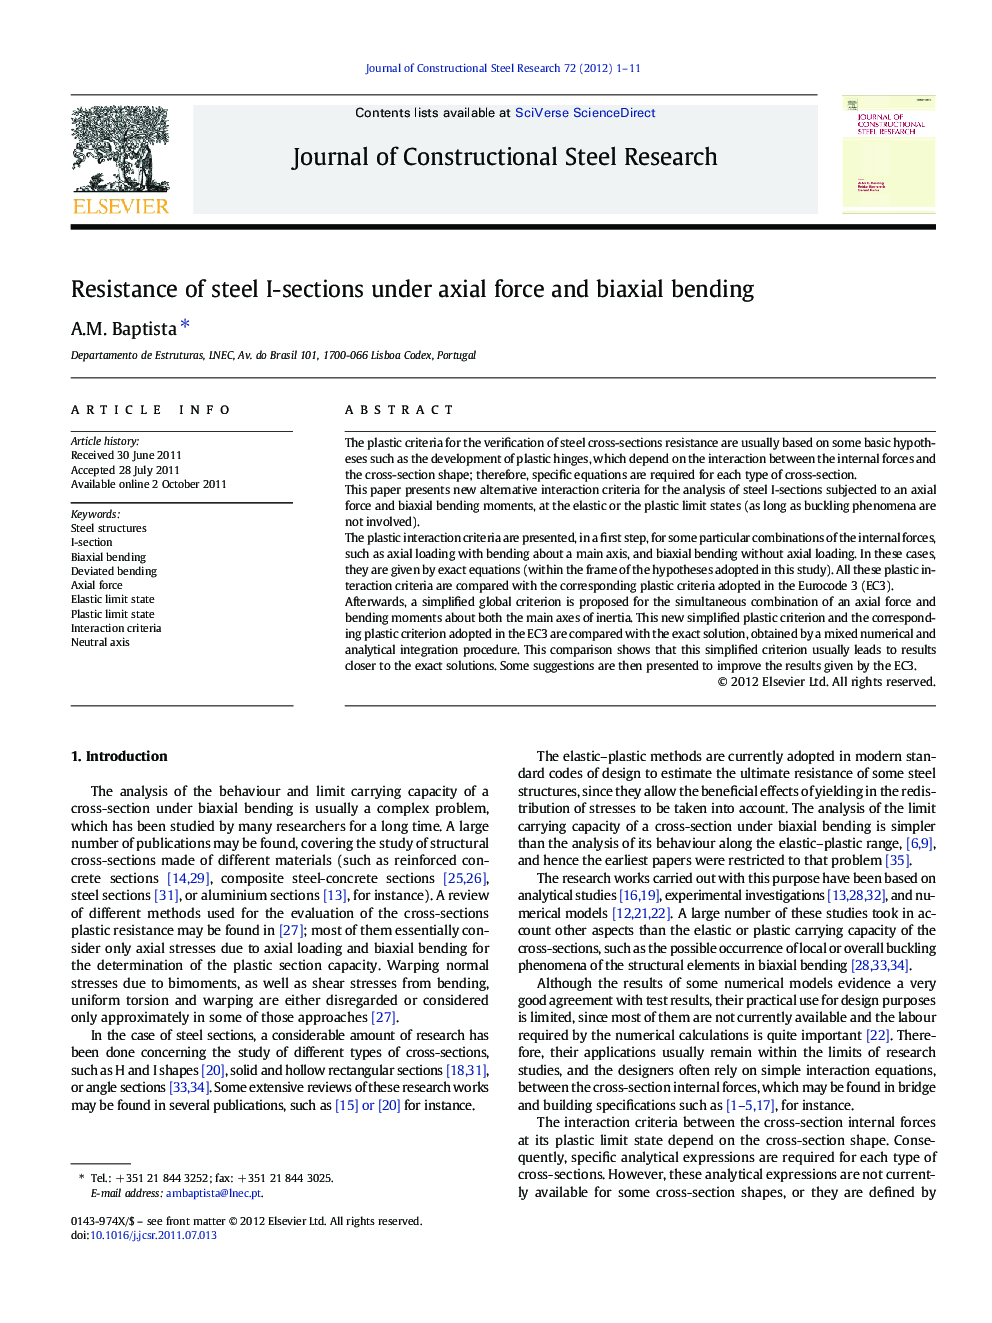 Resistance of steel I-sections under axial force and biaxial bending